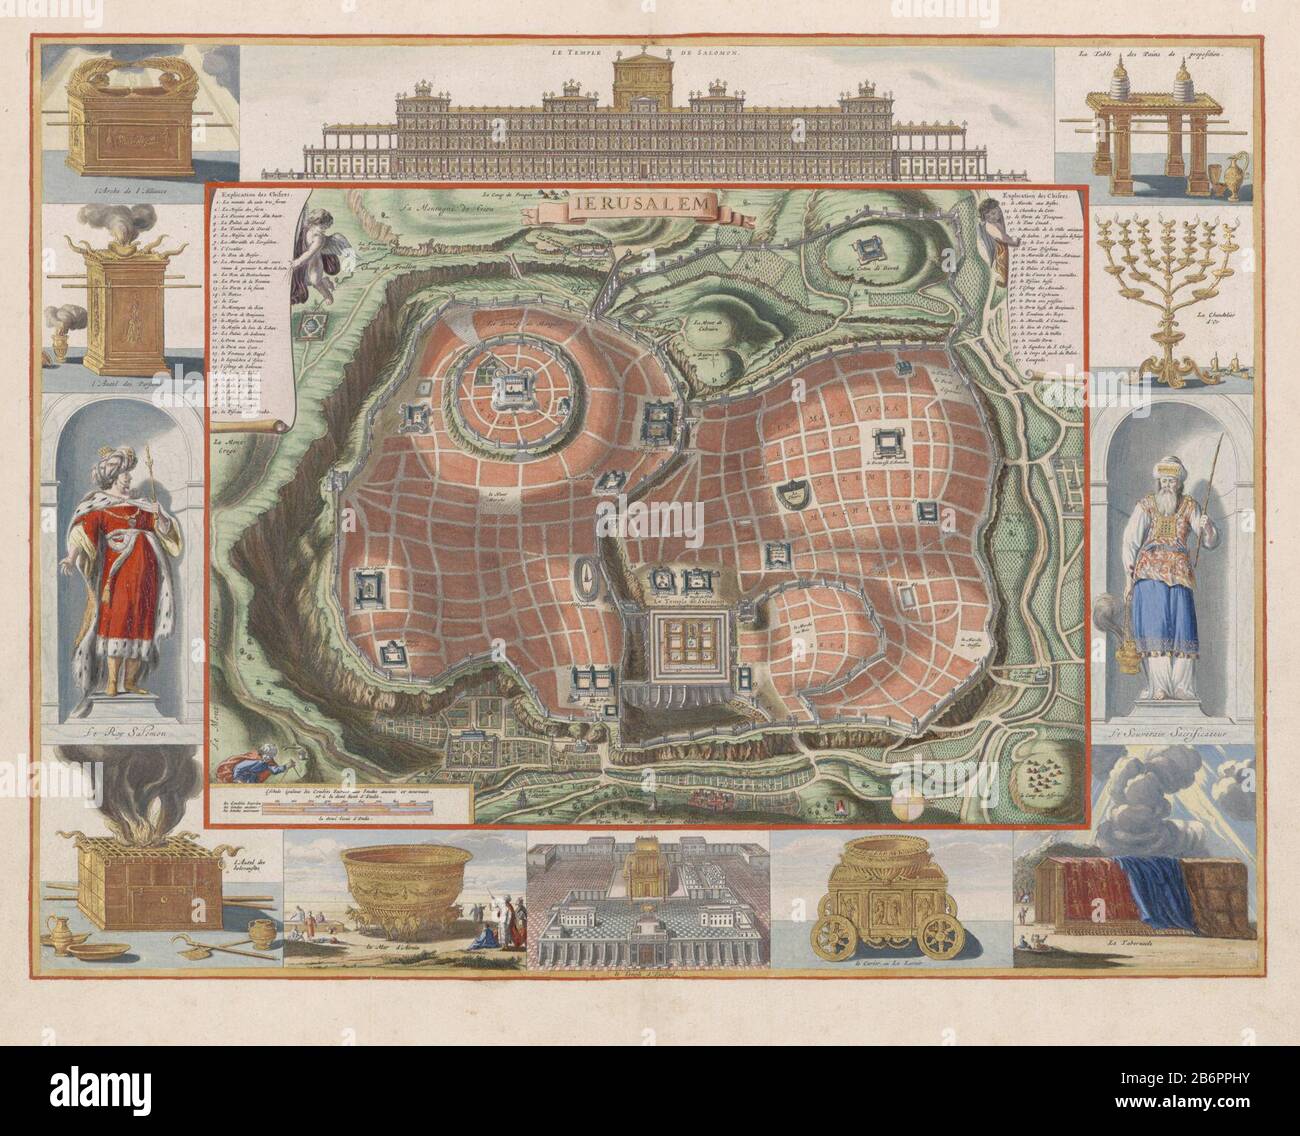 Gezicht op de Tempelberg van Jeruzalem vanuit het oosten Map of the Temple Mount Jerusalem from the east. In the outskirts different representations of the various temples and tempelgerei. Clockwise, right above the temple of Solomon, the table for the showbread, the menorah in a niche an image of high priest Aaron, the tabernacle, a gold rinse basin, the temple of Ezekiel, the basin called the Sea, the altar in a niche a statue of king Solomon, the smell offertory and the Ark of the Verbond. Manufacturer : printmaker: anonieminkleurder: Dirk Jansz van Santen (attributed to) Place manufacture: Stock Photo